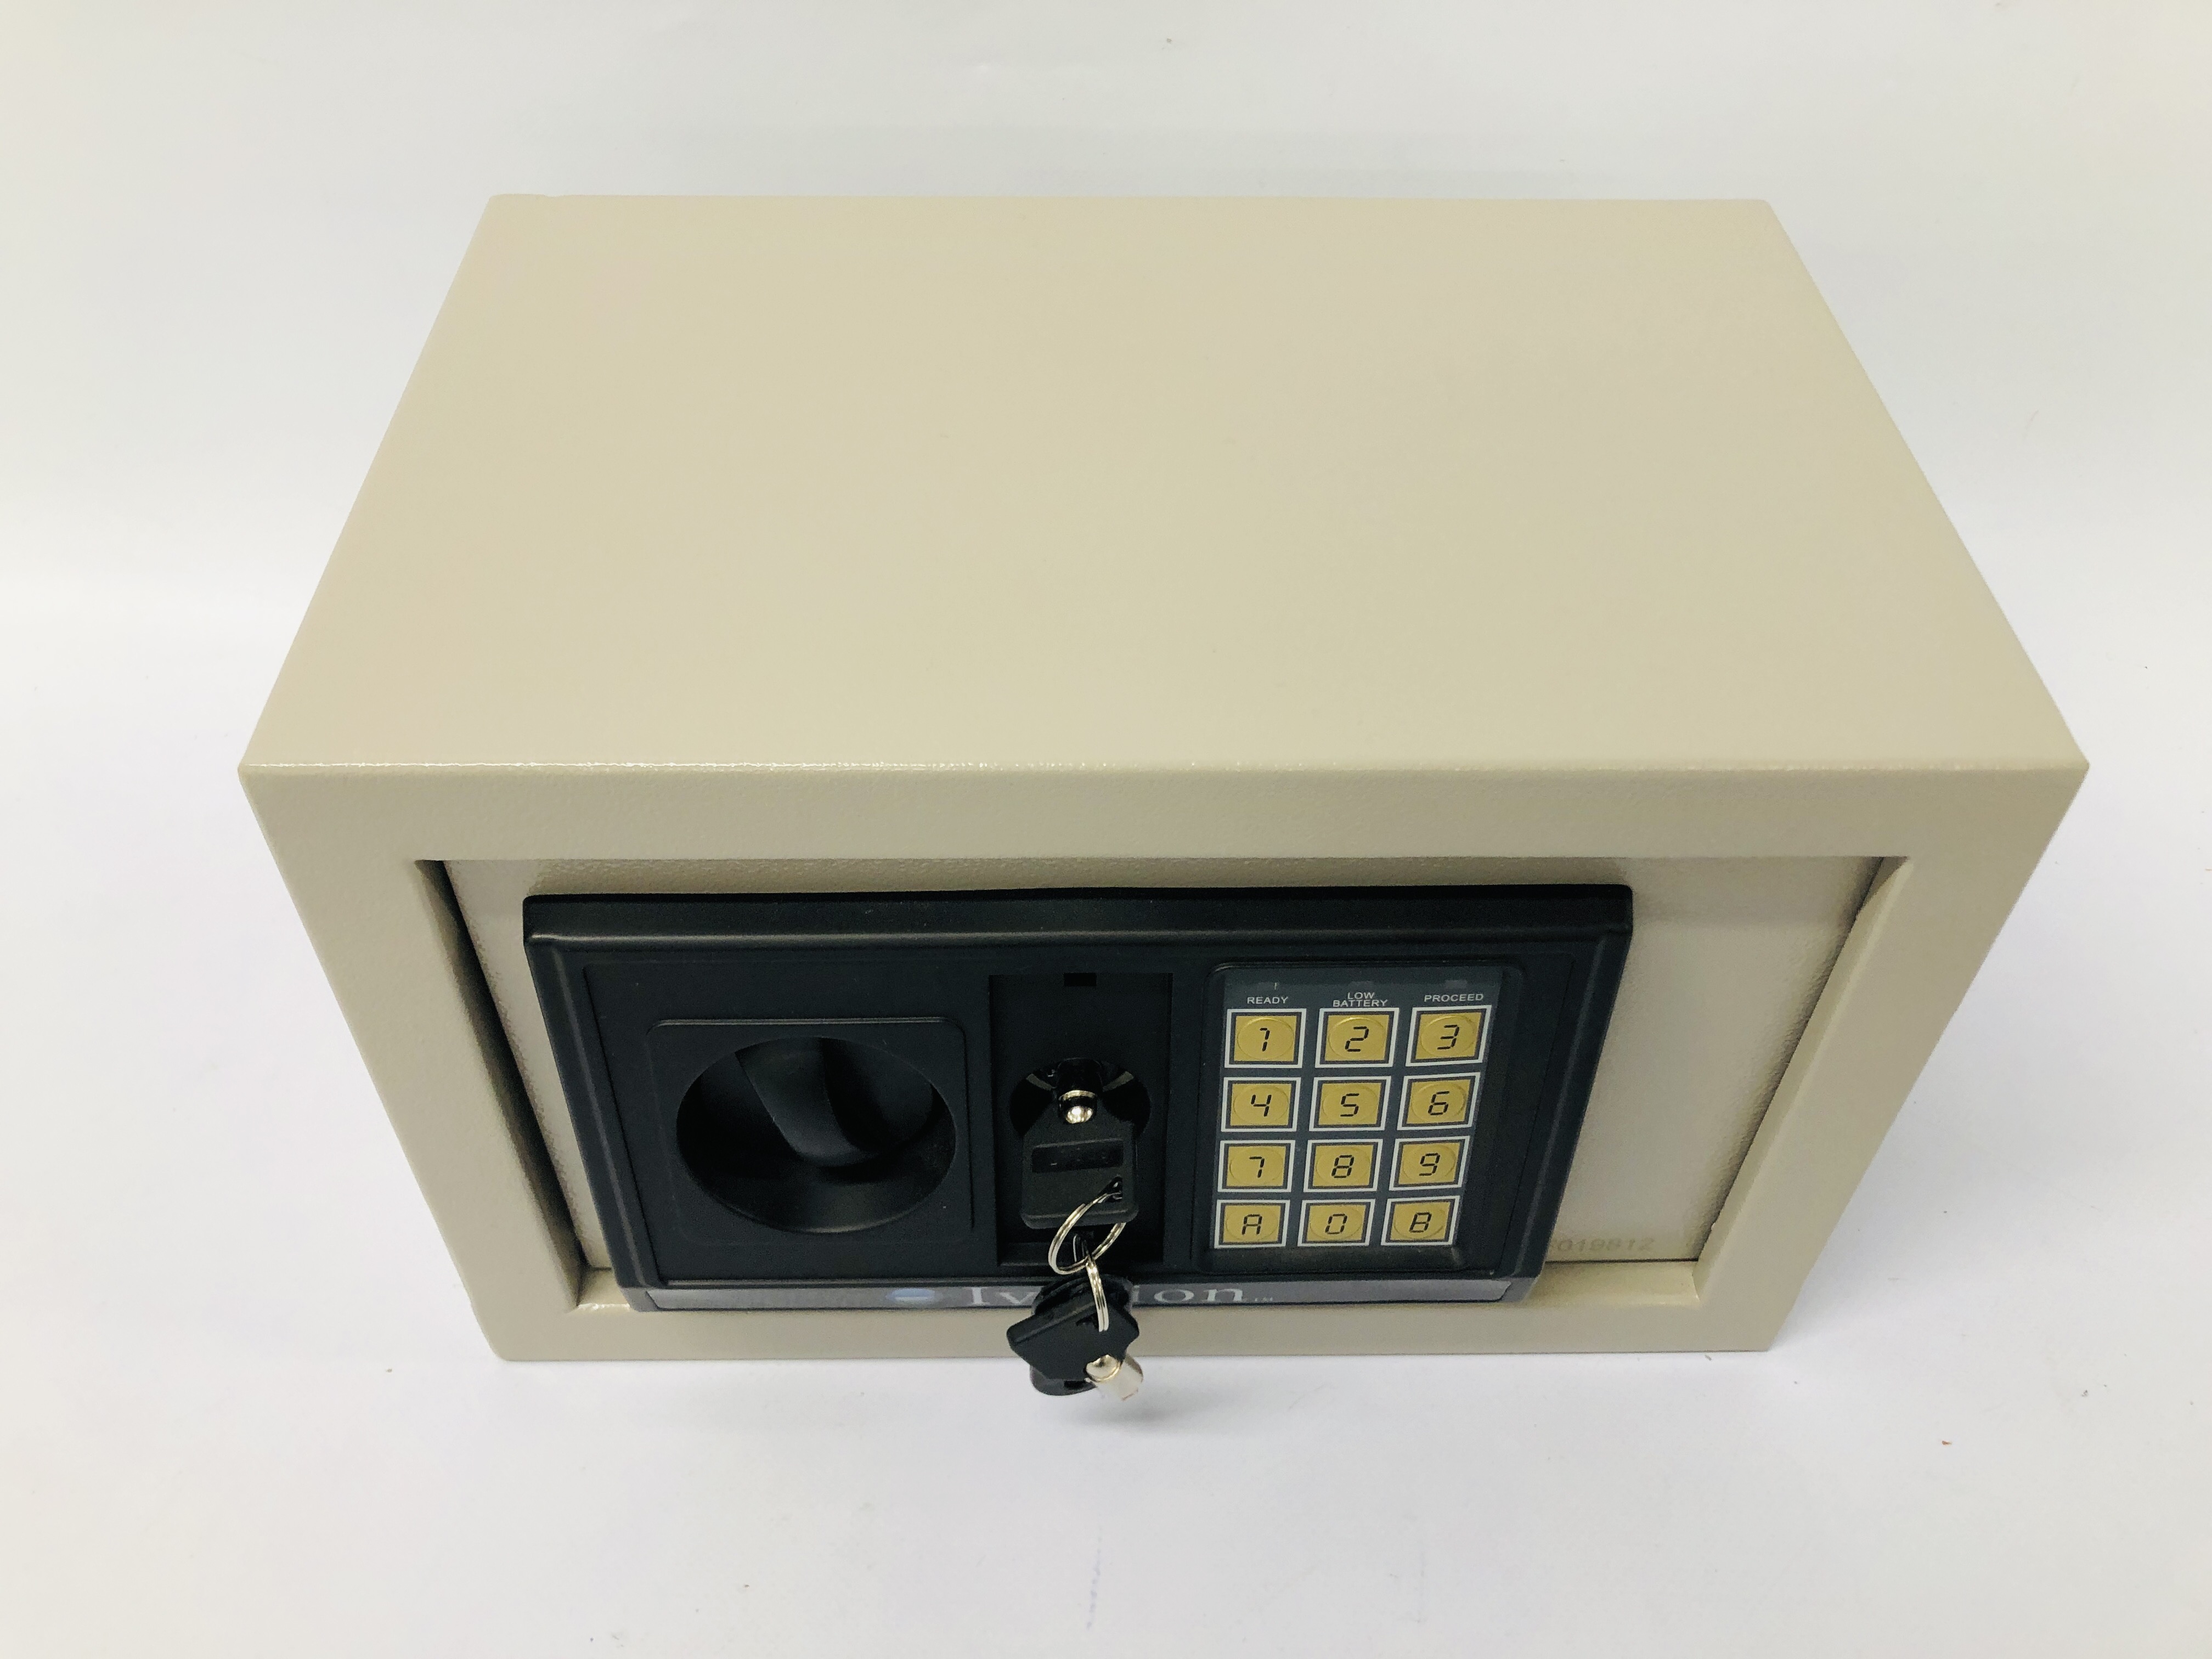 SMALL SAFE COMPLETE WITH KEYS AND ELECTRONIC CODE - 31CM WIDE, 20CM DEEP, - Image 2 of 5